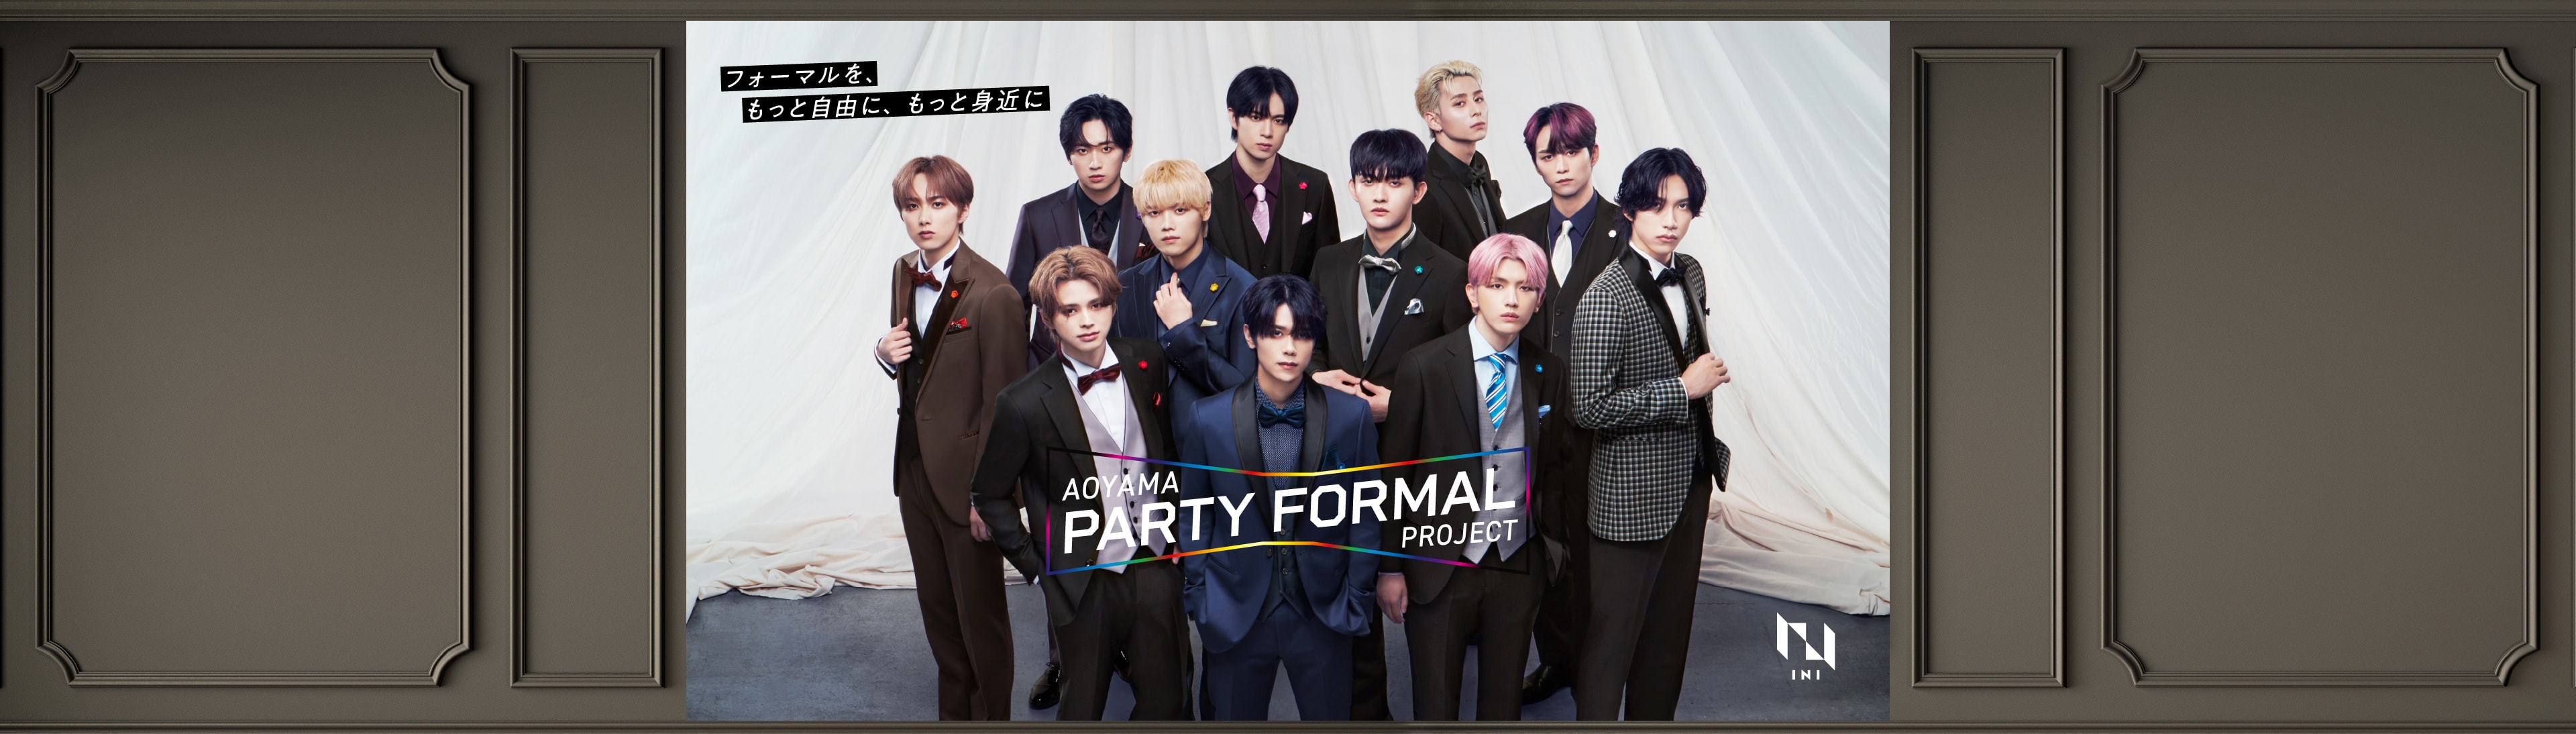 AOYAMA PARTY FORMAL PROJECT